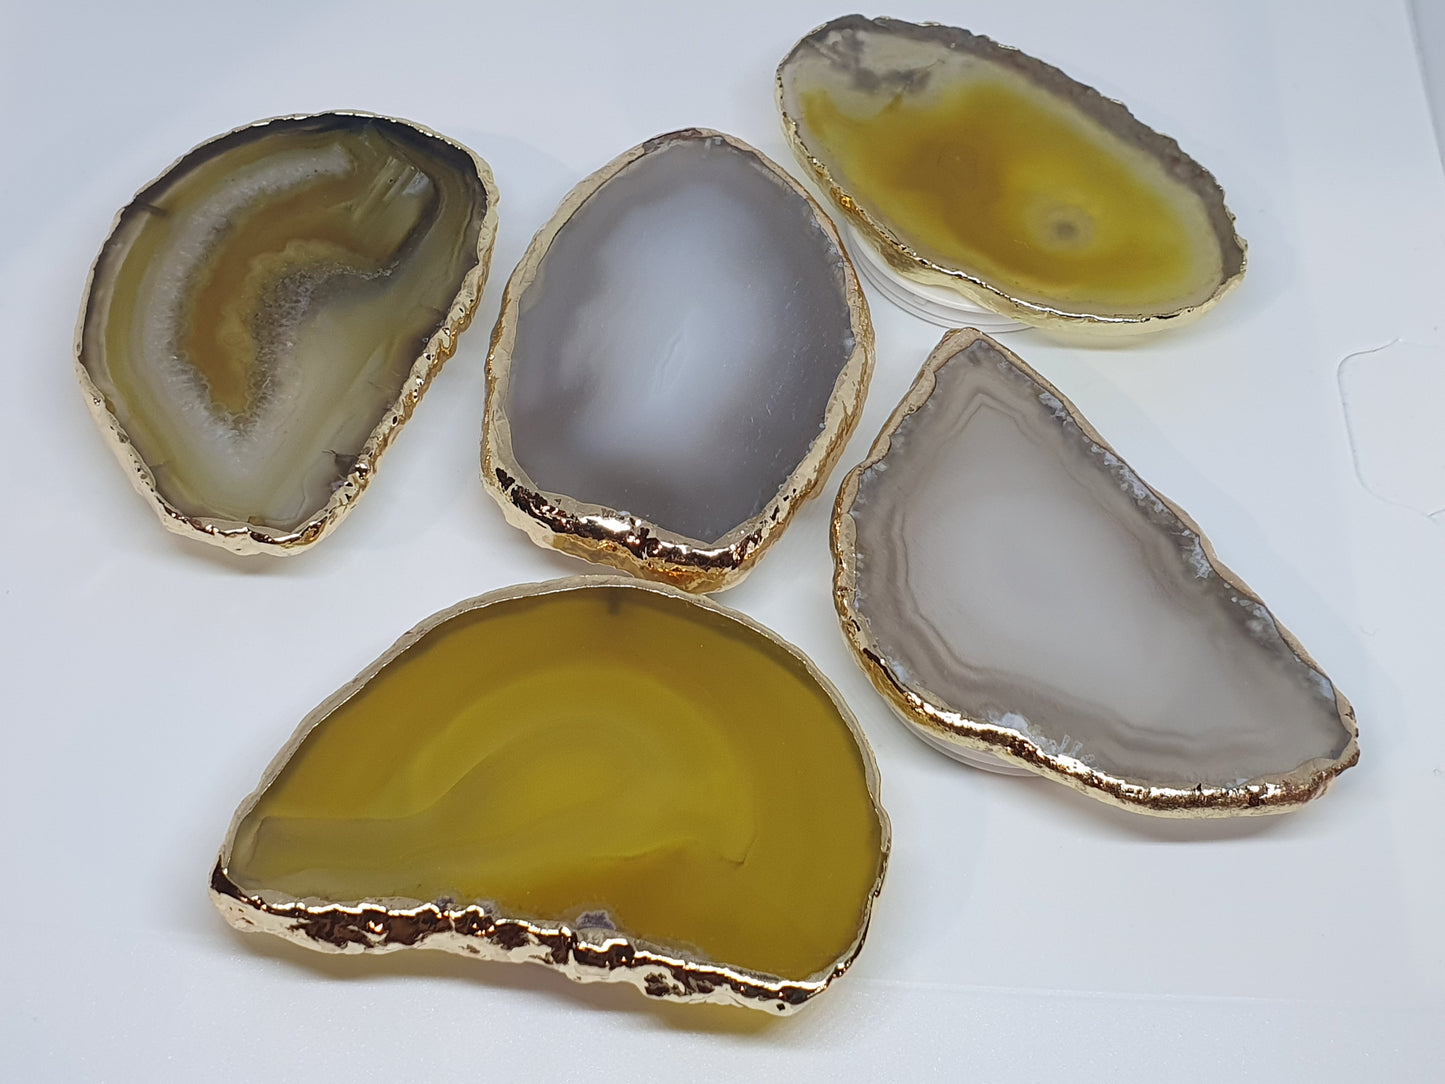 Gift for her | Gray Agate Natural edge | Yellow Black | Irregular with Gold Rim | Tiger Eye | Natural Gemstone Crystal | Phone Accessory